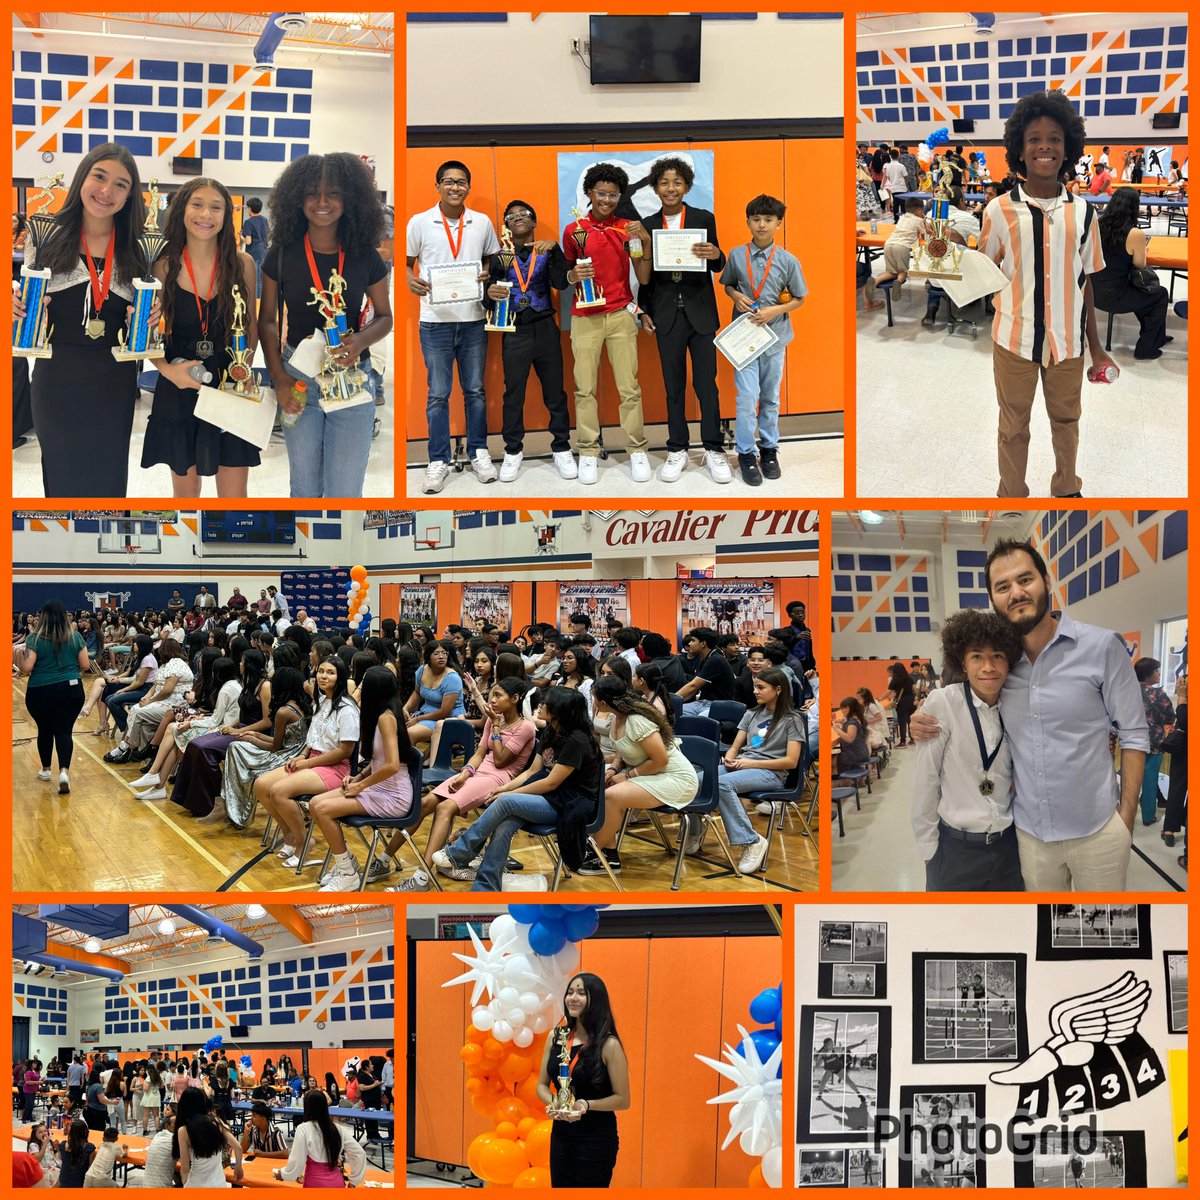 It was an incredible evening celebrating our Cavaliers Athletes. Thank you to our coaches for putting together a memorable evening to celebrate all of their athletic achievements 👏! #Chasing100 #CavPride #StudentAthletes 🧡💙